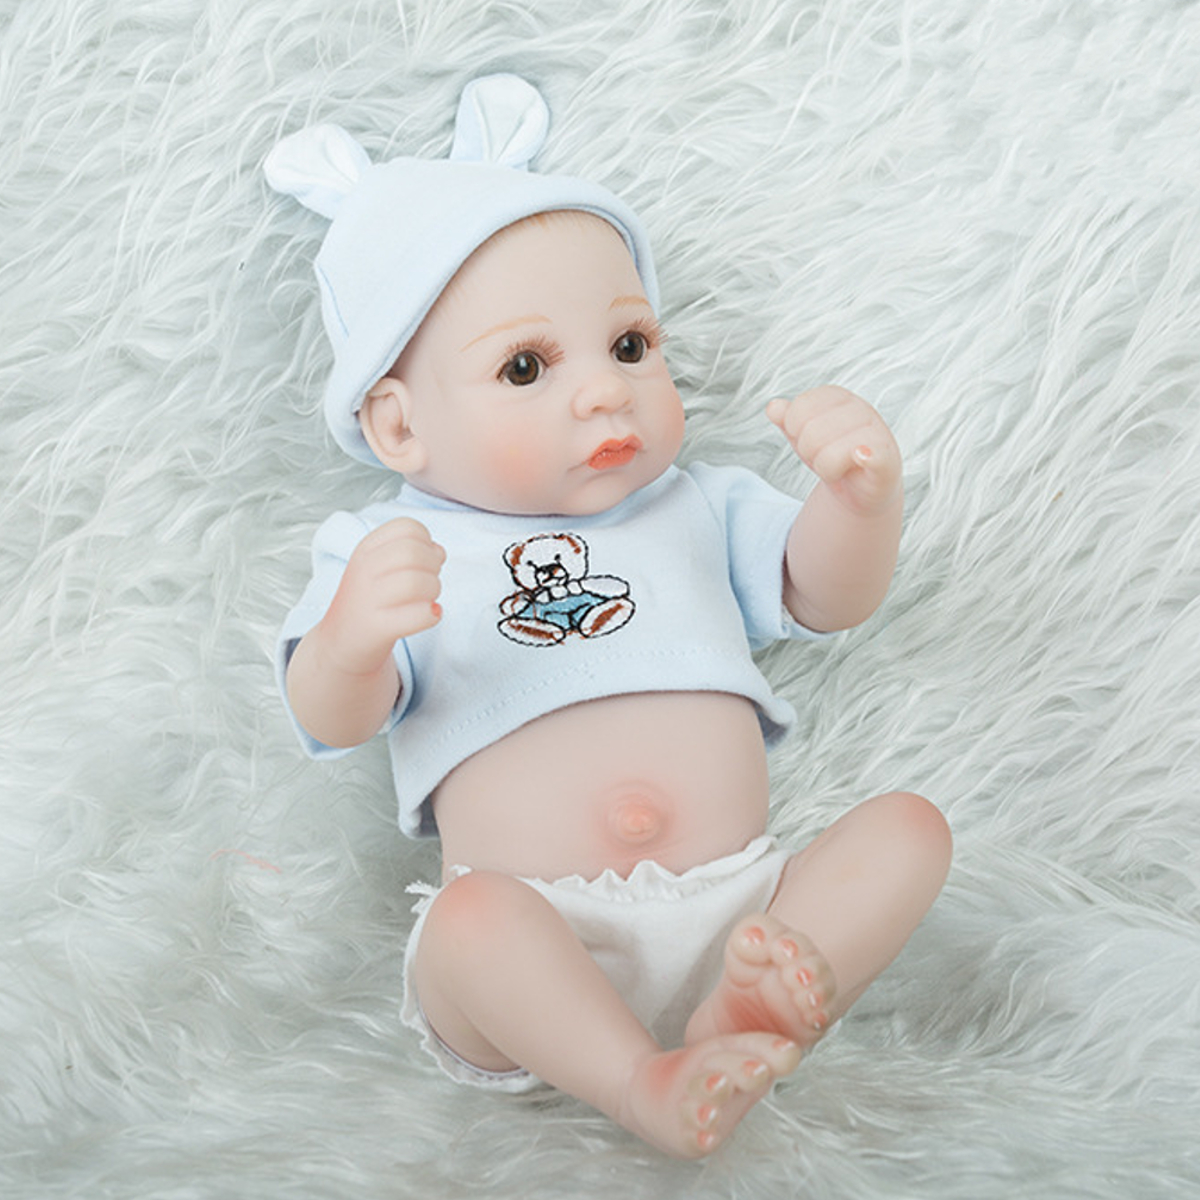 28CM-Silicone-Realistic-Sleeping-Reborns-Lifelike-Newborn-Baby-Doll-Toy-with-Moveable-Head-Arms-And--1817558-5